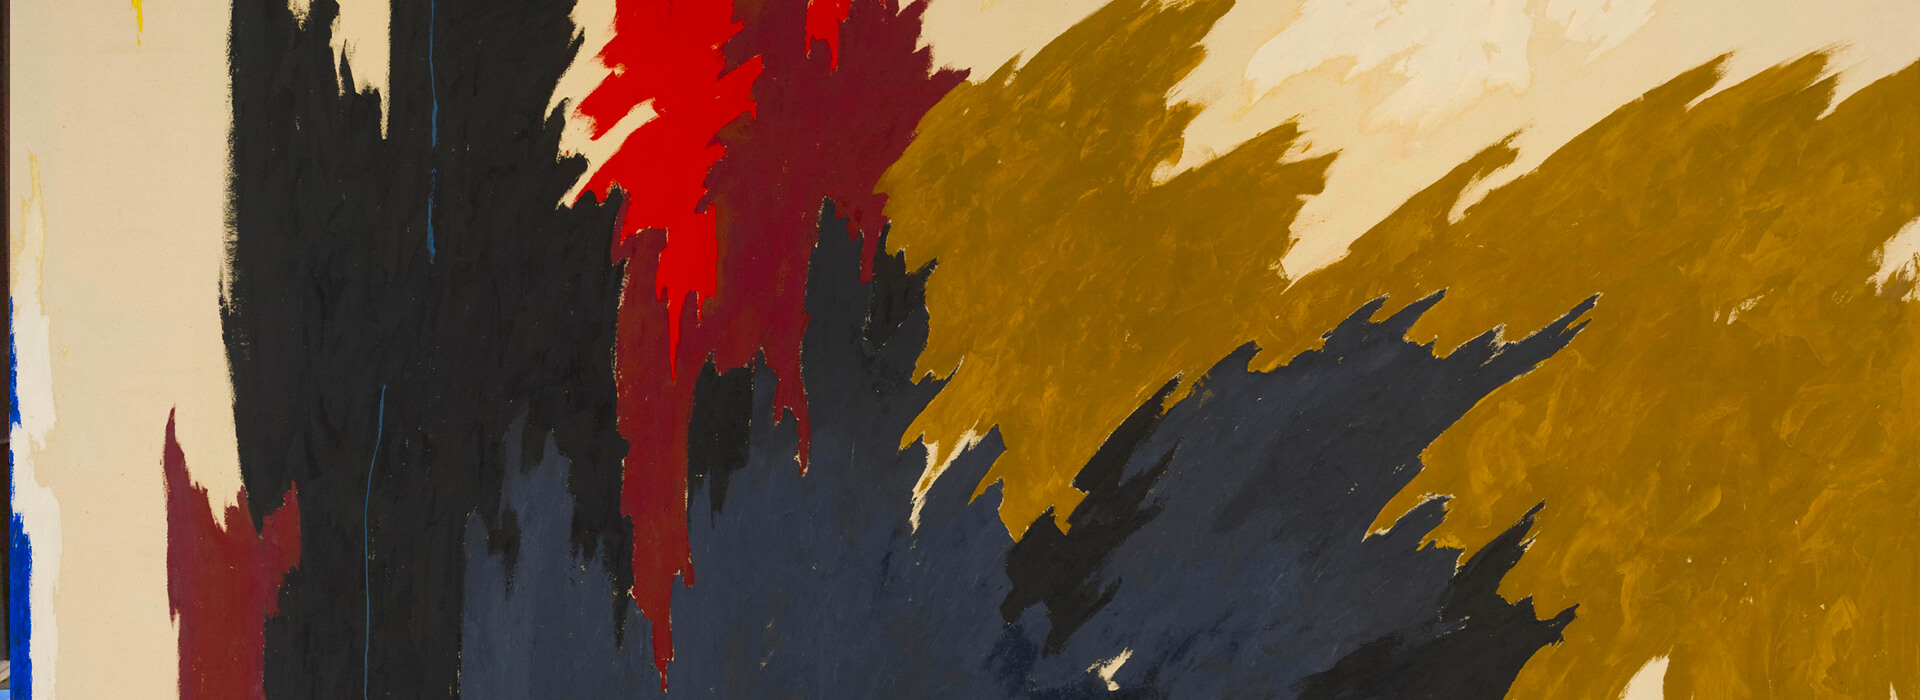 Detailed image of abstract Clyfford Still painting